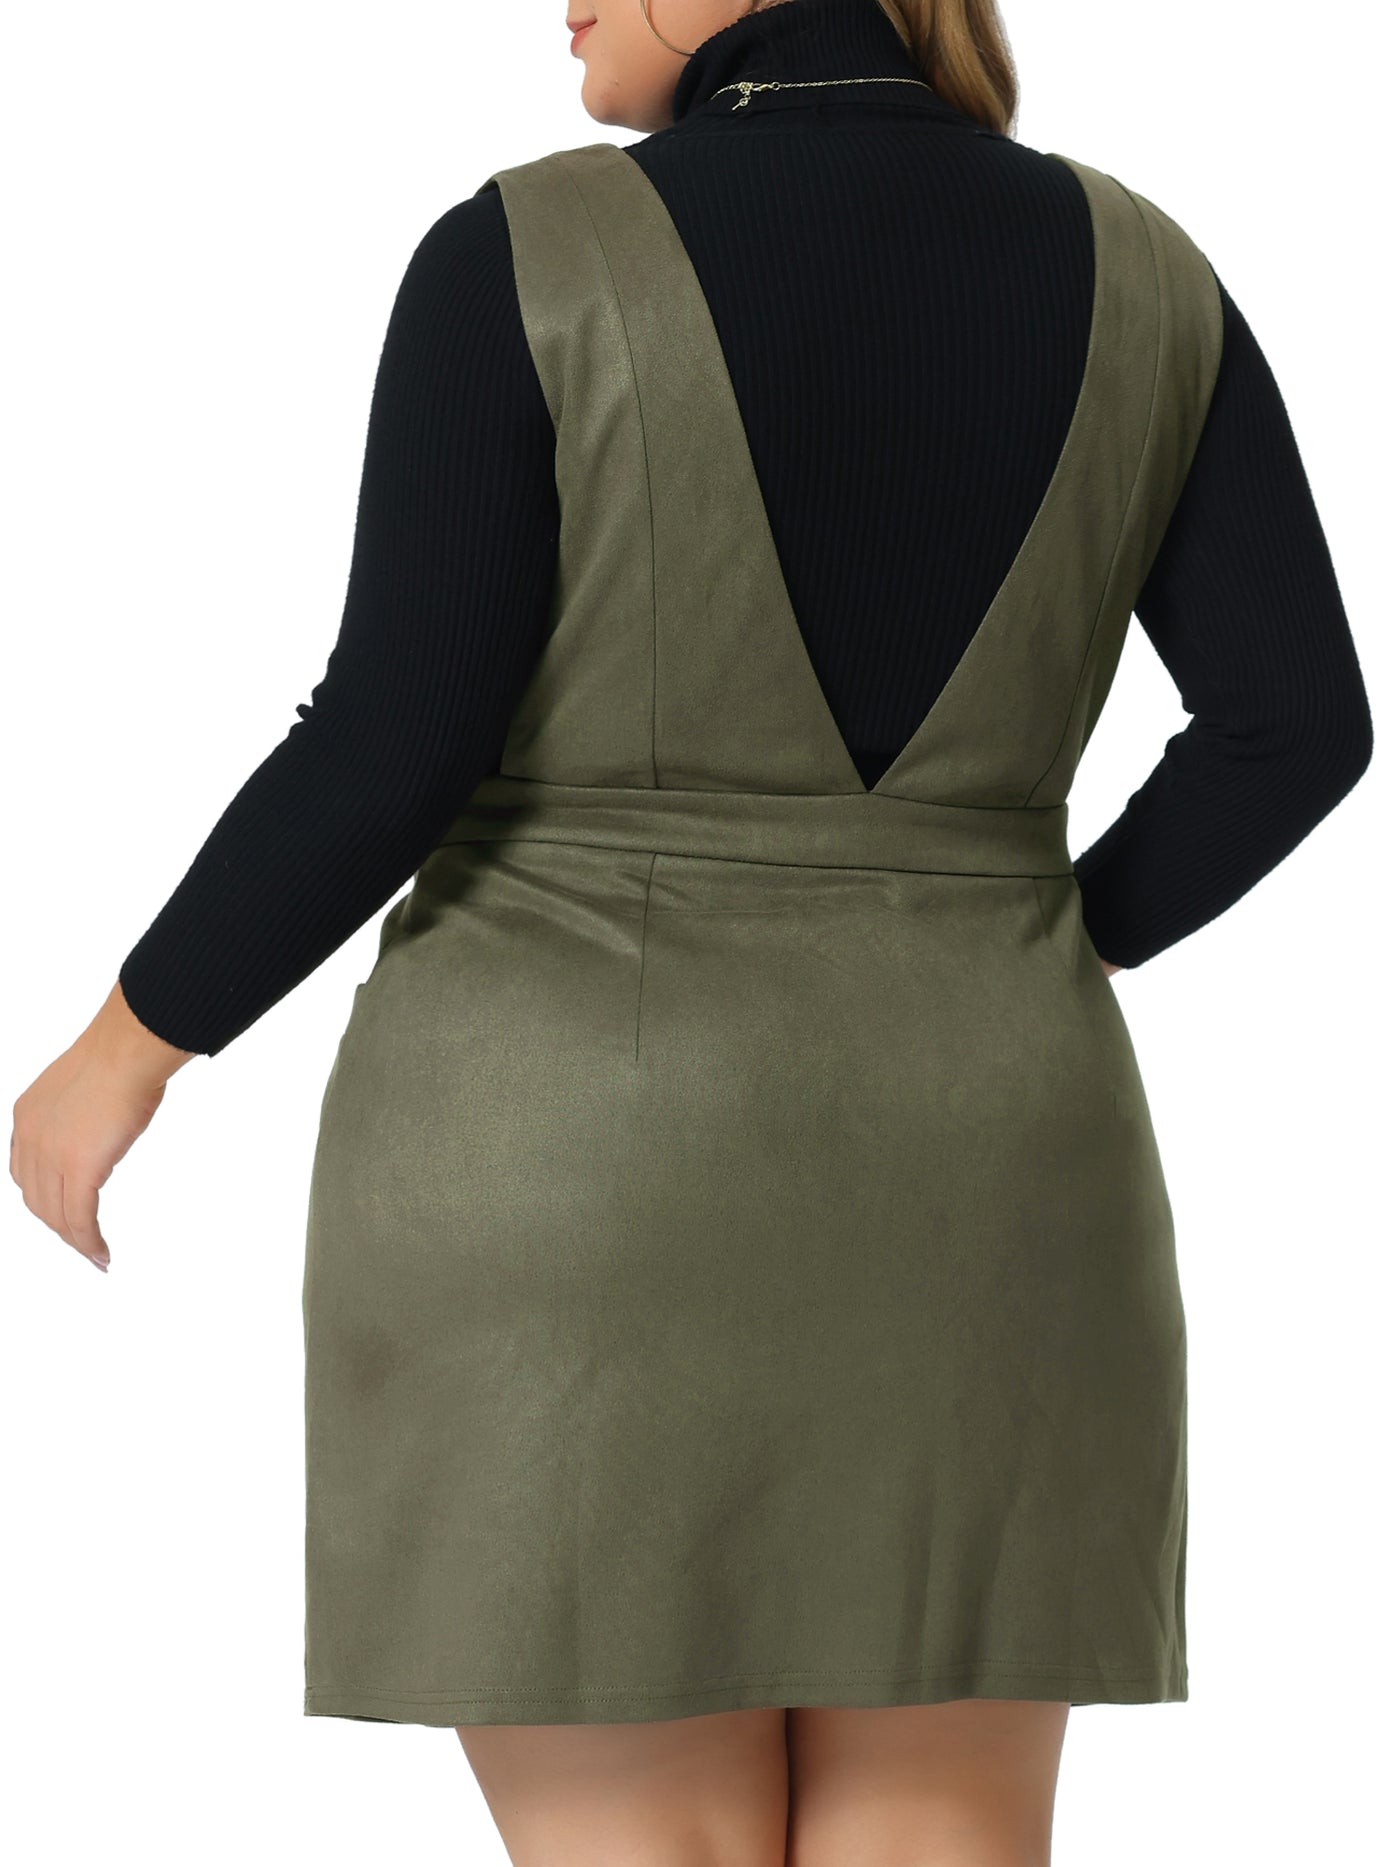 Bublédon Plus Size Overall Dress for Women Faux Suede V Neck Wide Strap Suspender Pockets Pinafore Mini Skirt